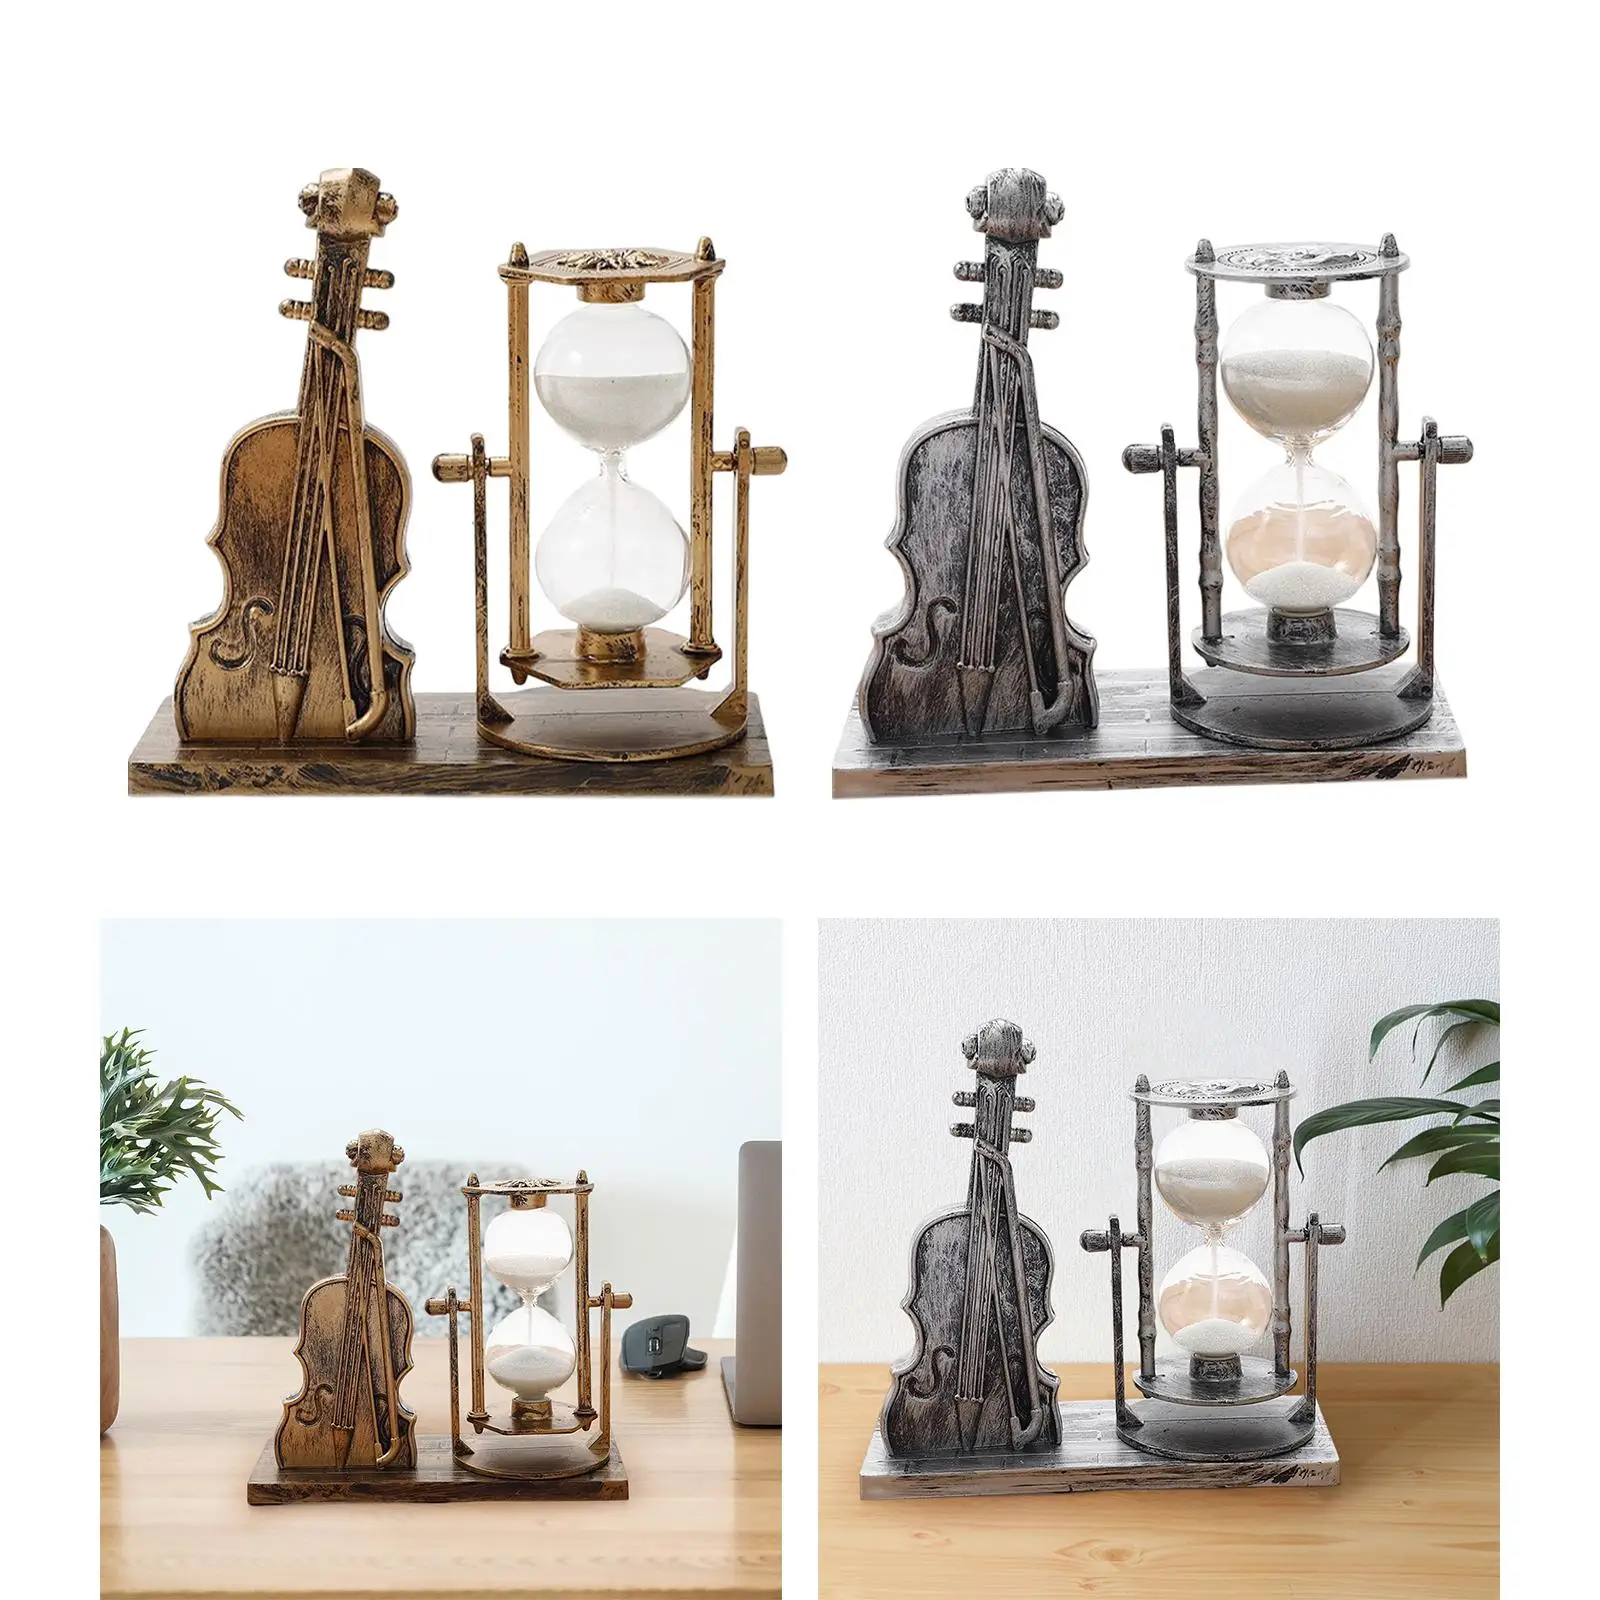 Hourglass Violin Sculpture Vintage Sand Clock Decorative Exquisite for Table Centerpieces Home Office Party Birthday Gift